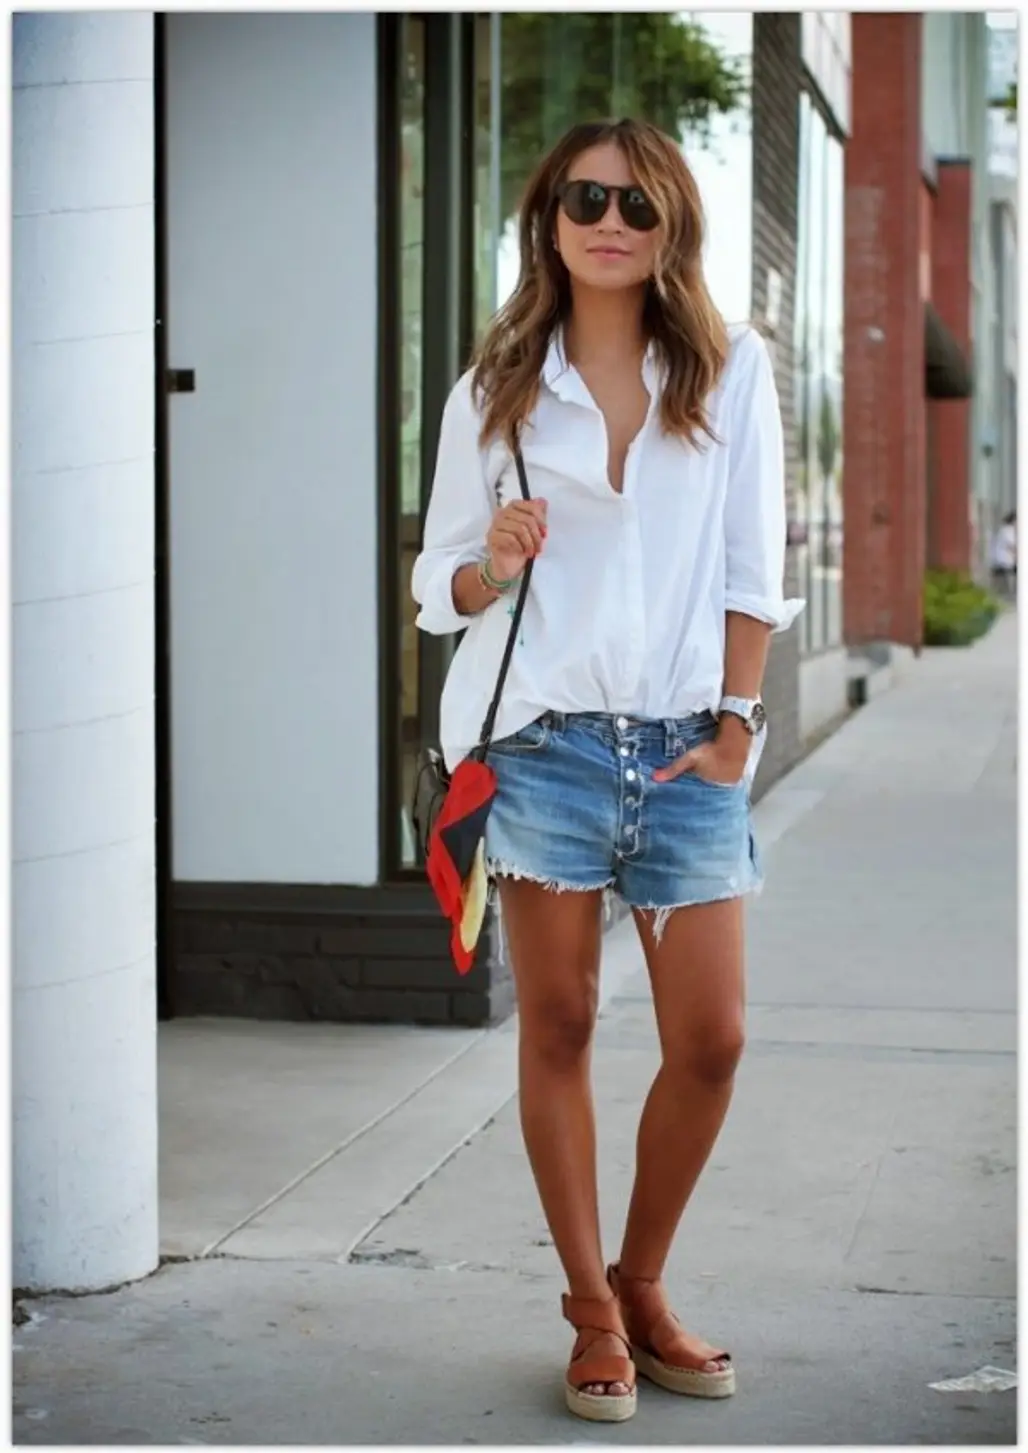 Keep It Casual with an Oversized White Shirt and Denim Cut-offs